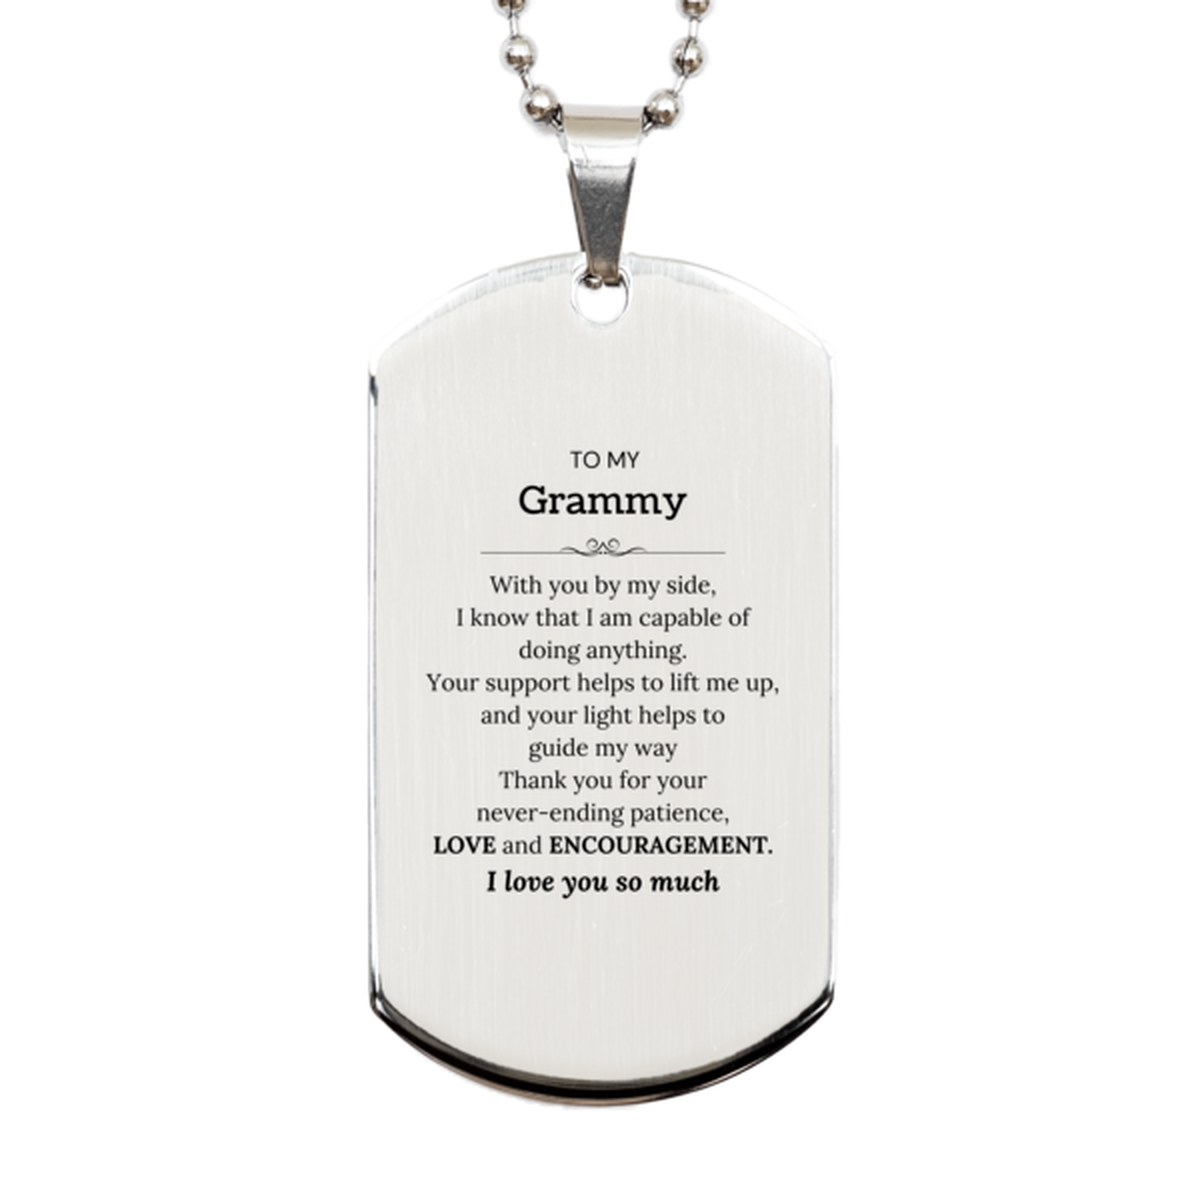 Appreciation Grammy Silver Dog Tag Gifts, To My Grammy Birthday Christmas Wedding Keepsake Gifts for Grammy With you by my side, I know that I am capable of doing anything. I love you so much